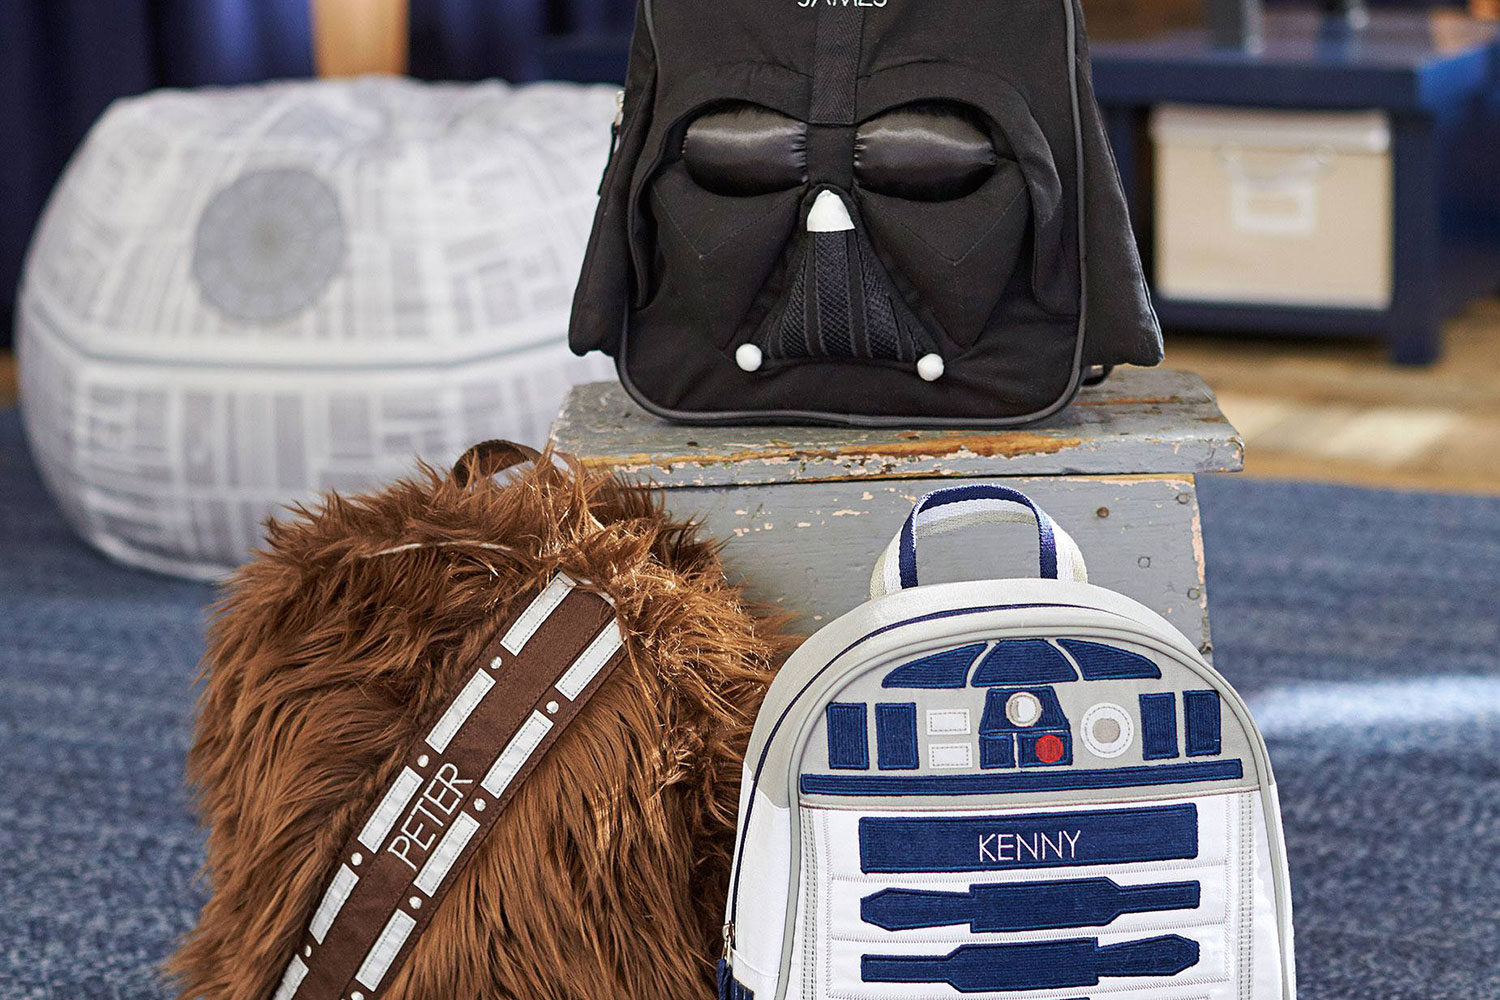 pottery barn has a 4000 star wars bed for sale  backpacks with sound 50